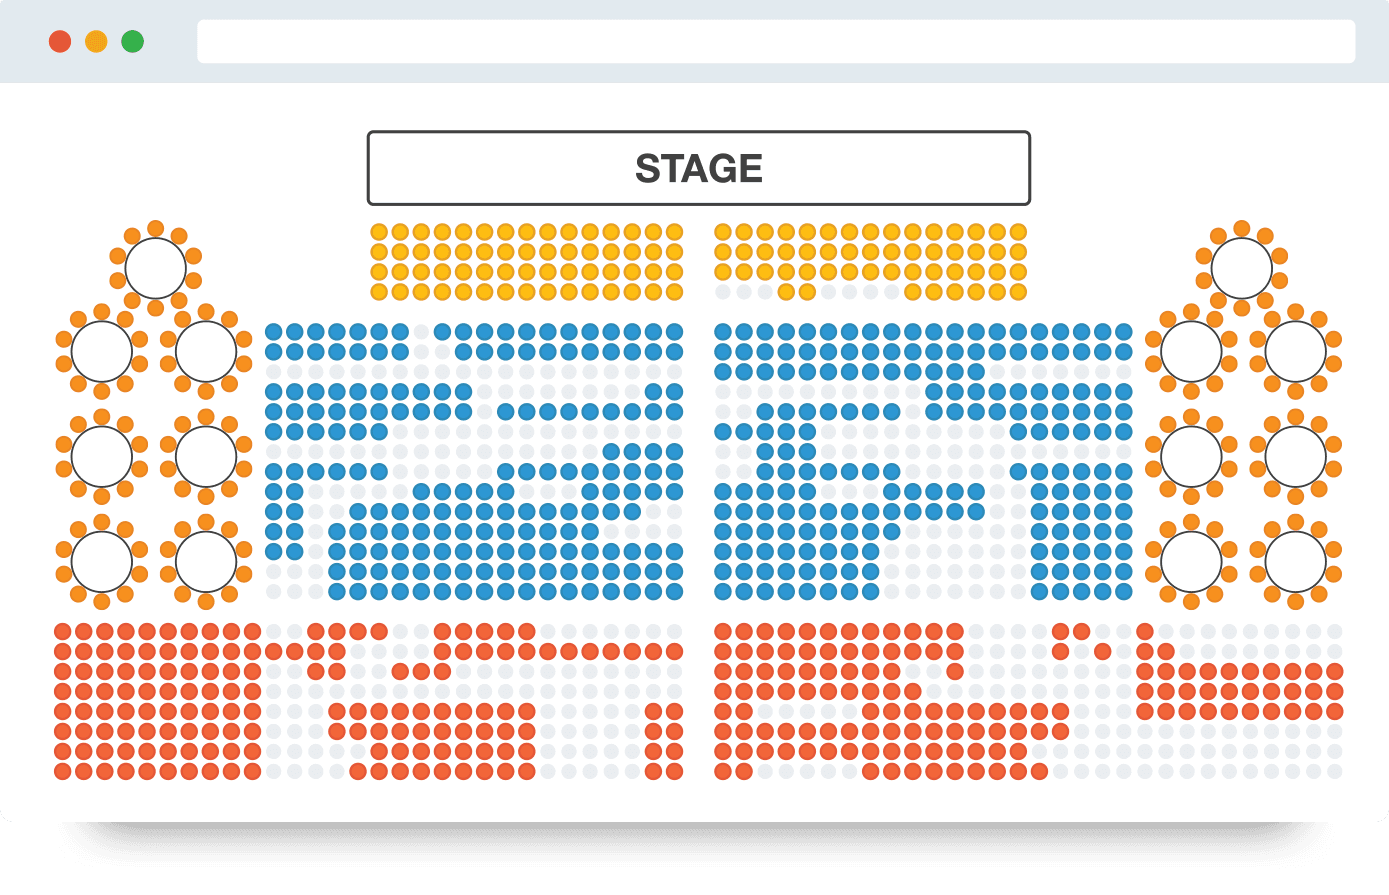 A map of a seating layout of a concert